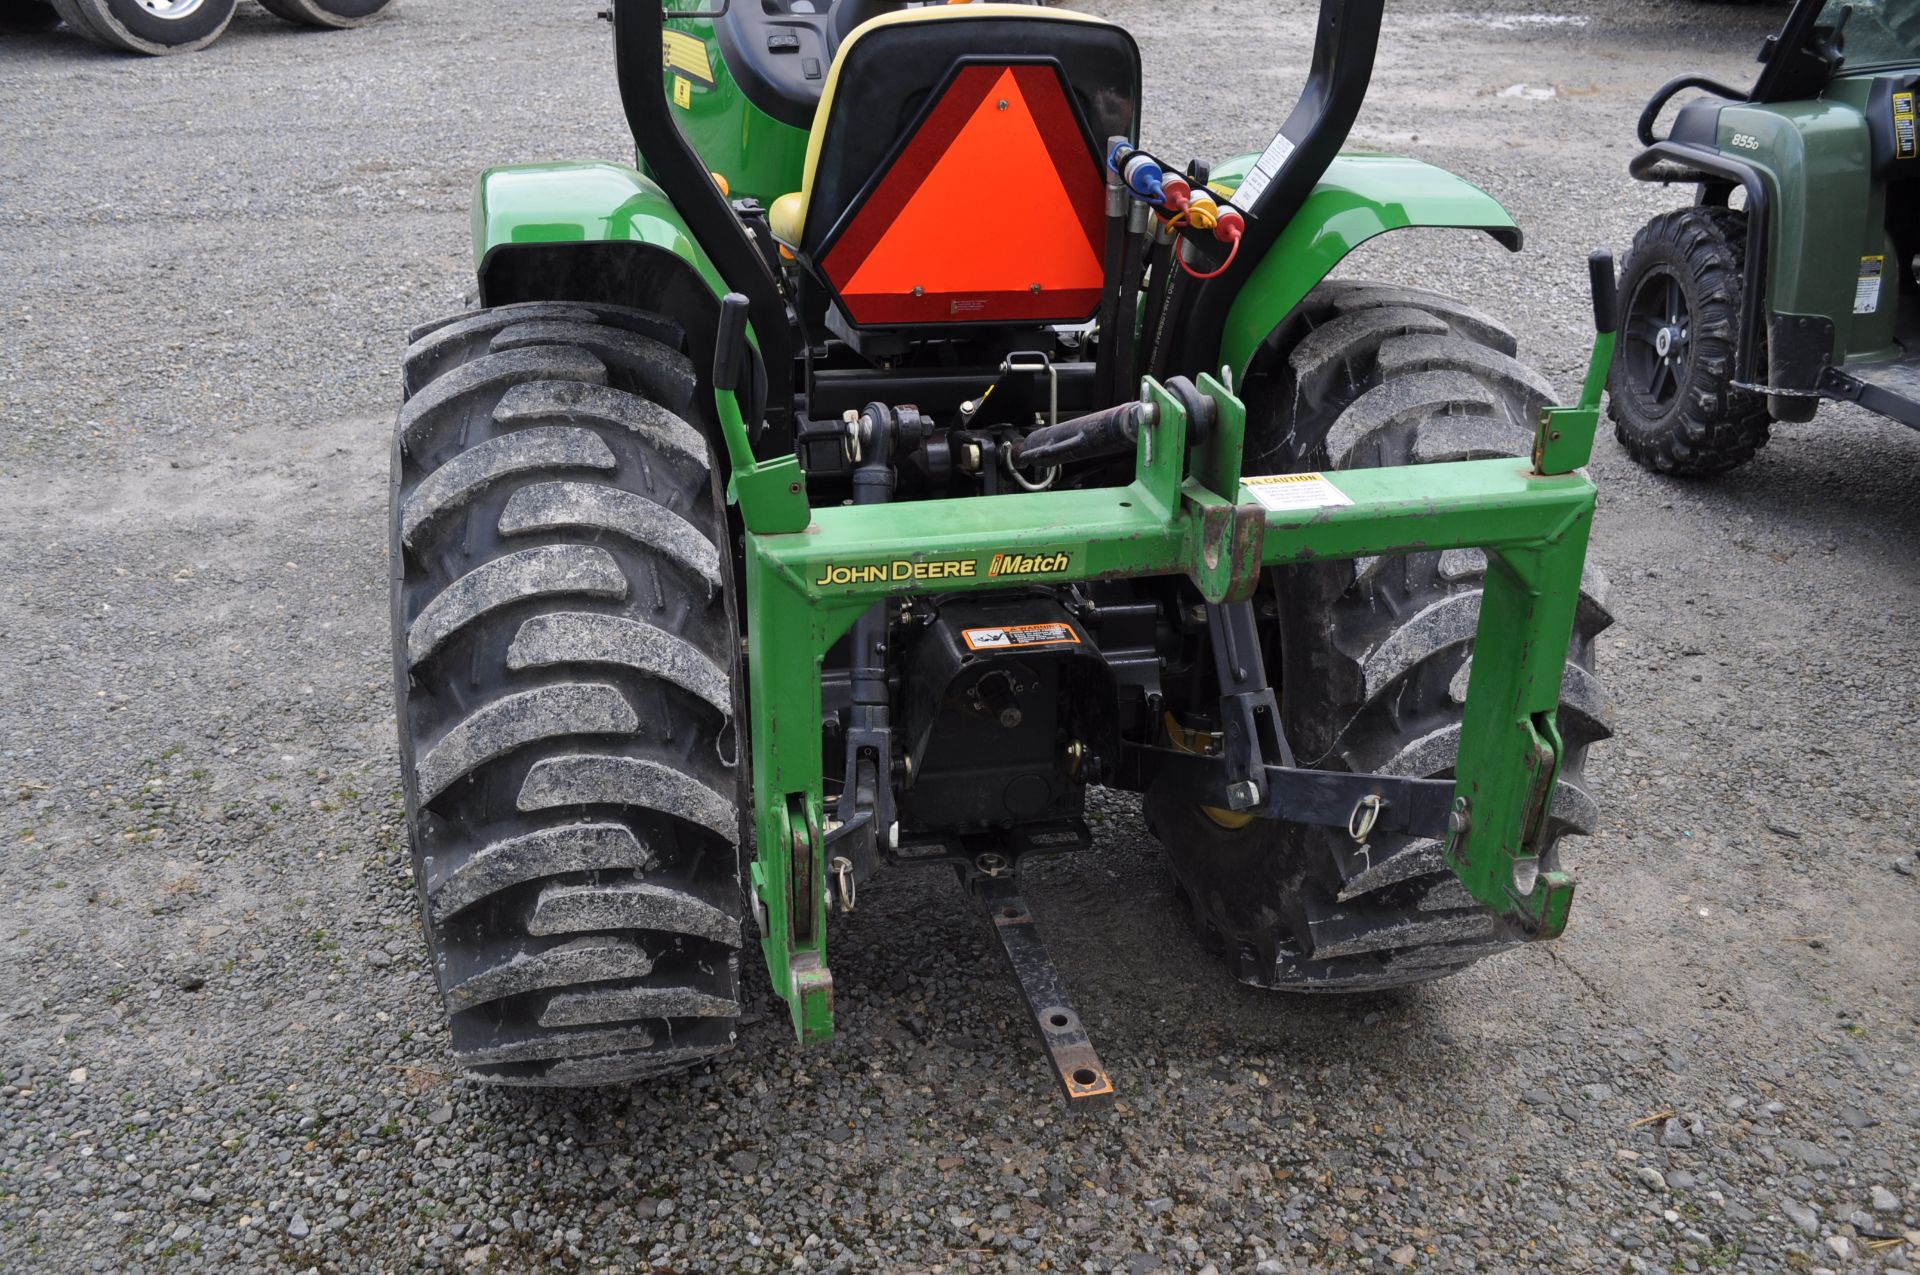 John Deere 3203 compact tractor, 15-19.5 rear, 25 x 8.50-14 front, 4x4 front wts, mid mast hyd - Image 15 of 26